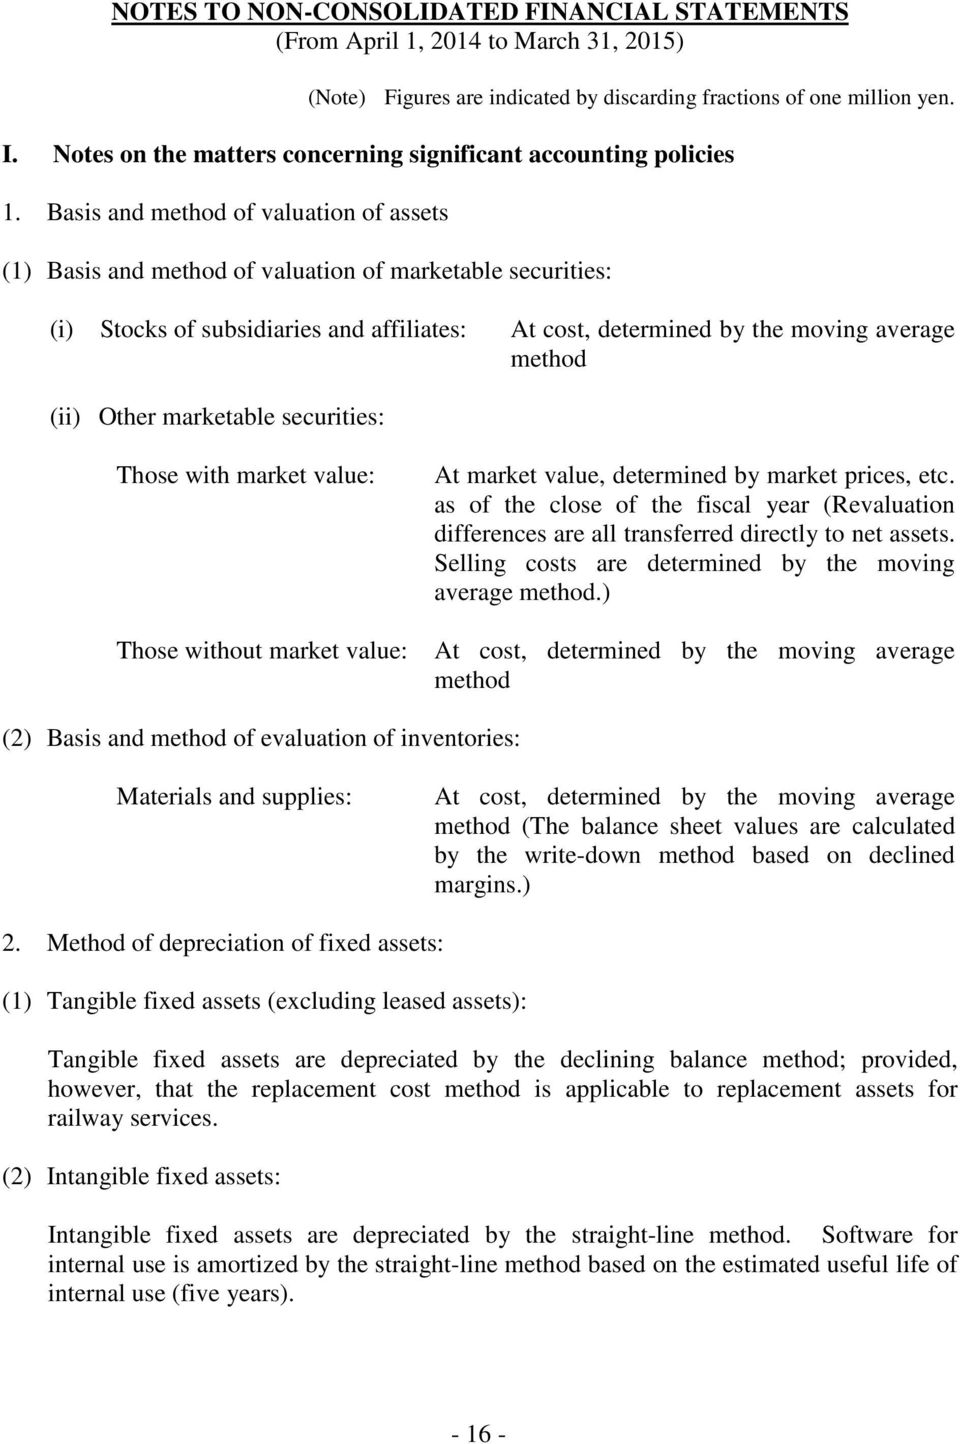 Basis and method of valuation of assets (1) Basis and method of valuation of marketable securities: (i) Stocks of subsidiaries and affiliates: At cost, determined by the moving average method (ii)